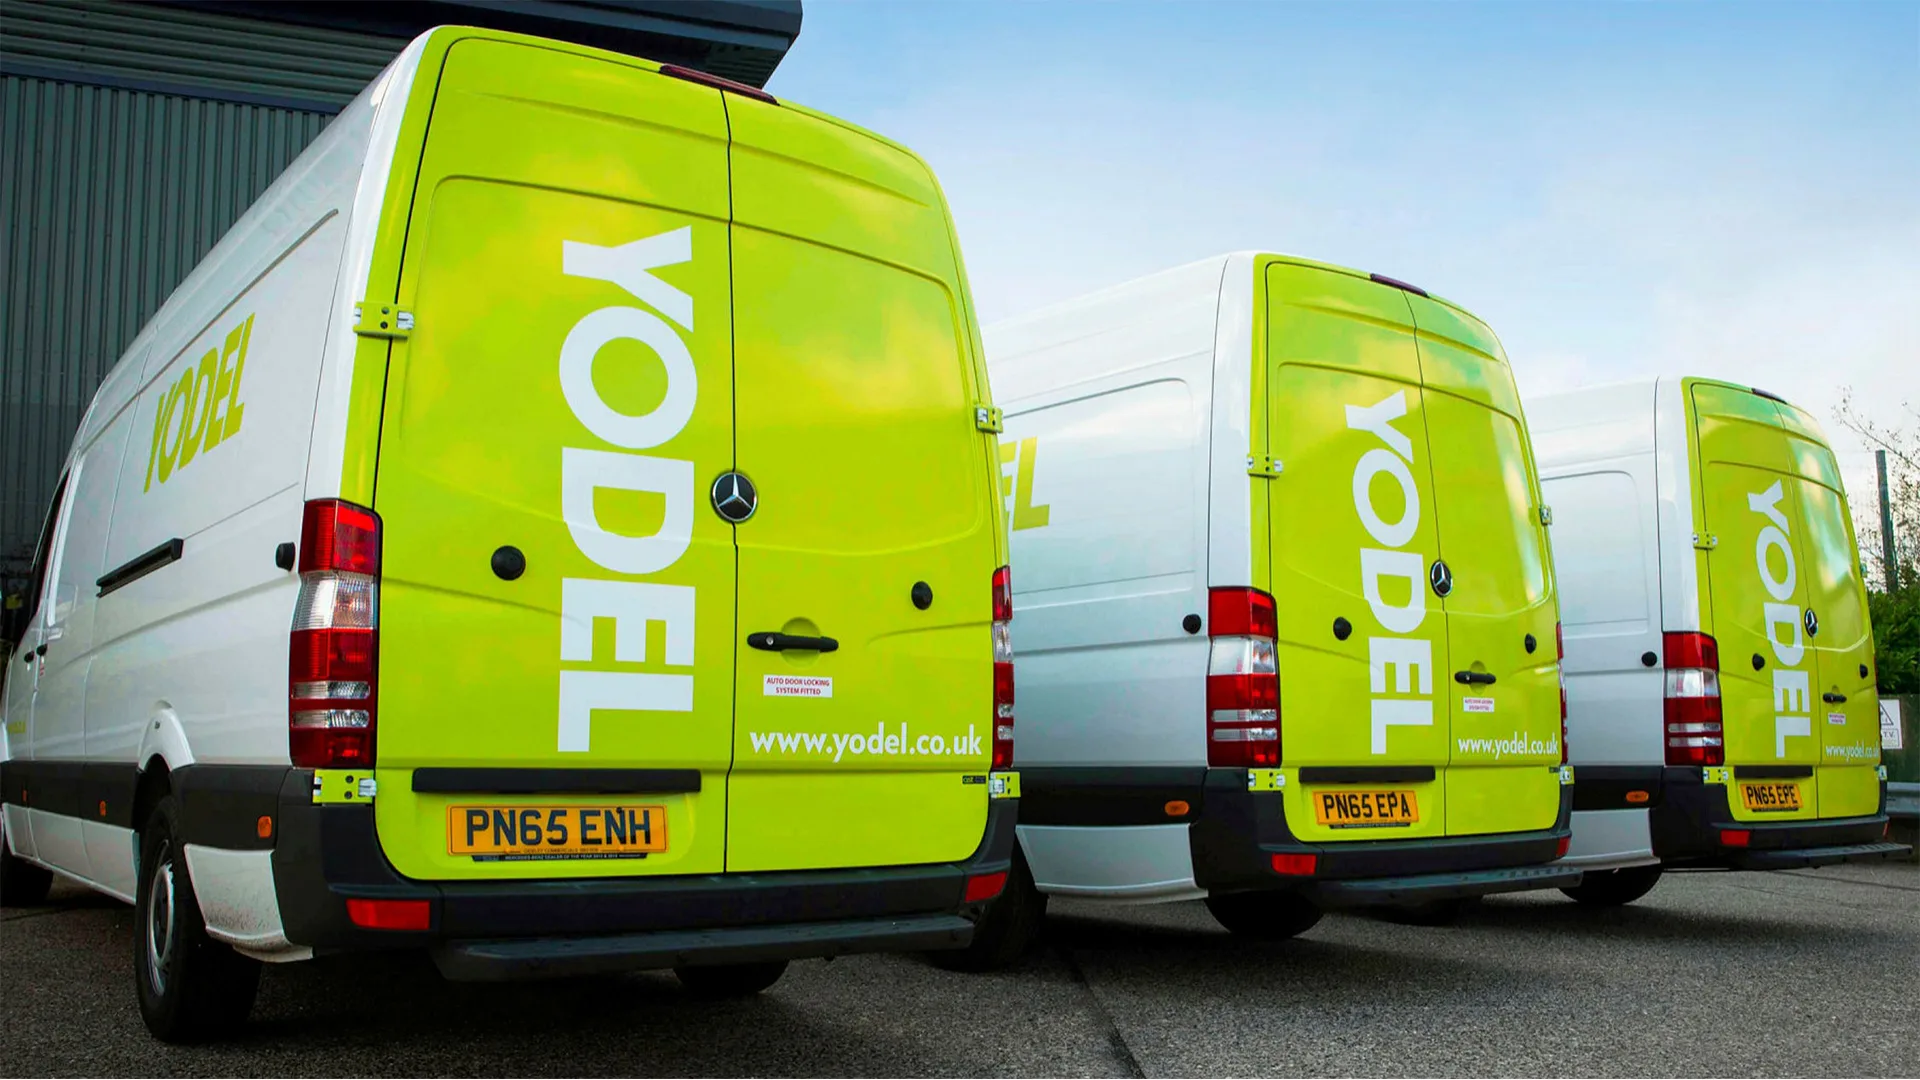 Sources said Yodel is seeking a purchase and prepares to "call in administrators".